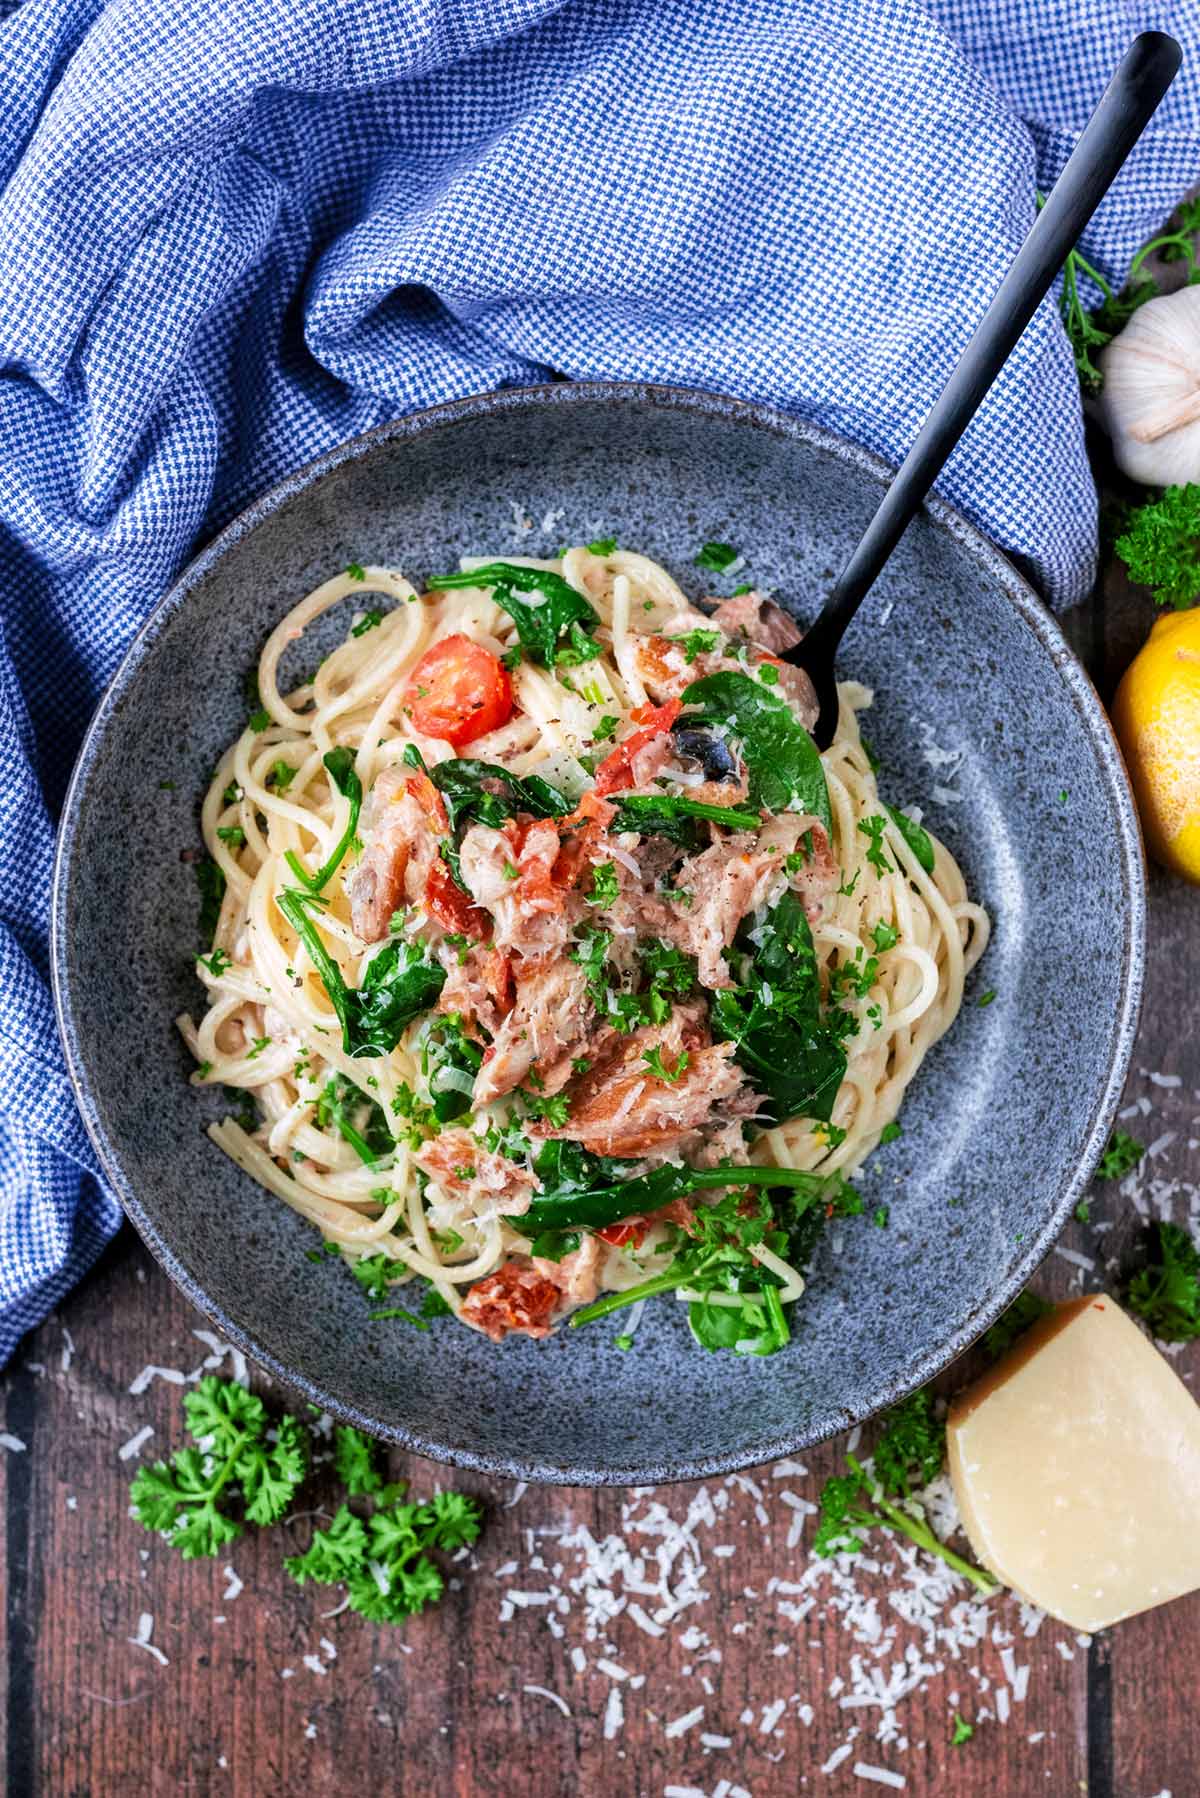 A bowl full of spaghetti mixed with flaked mackerel, tomatoes and spinach.